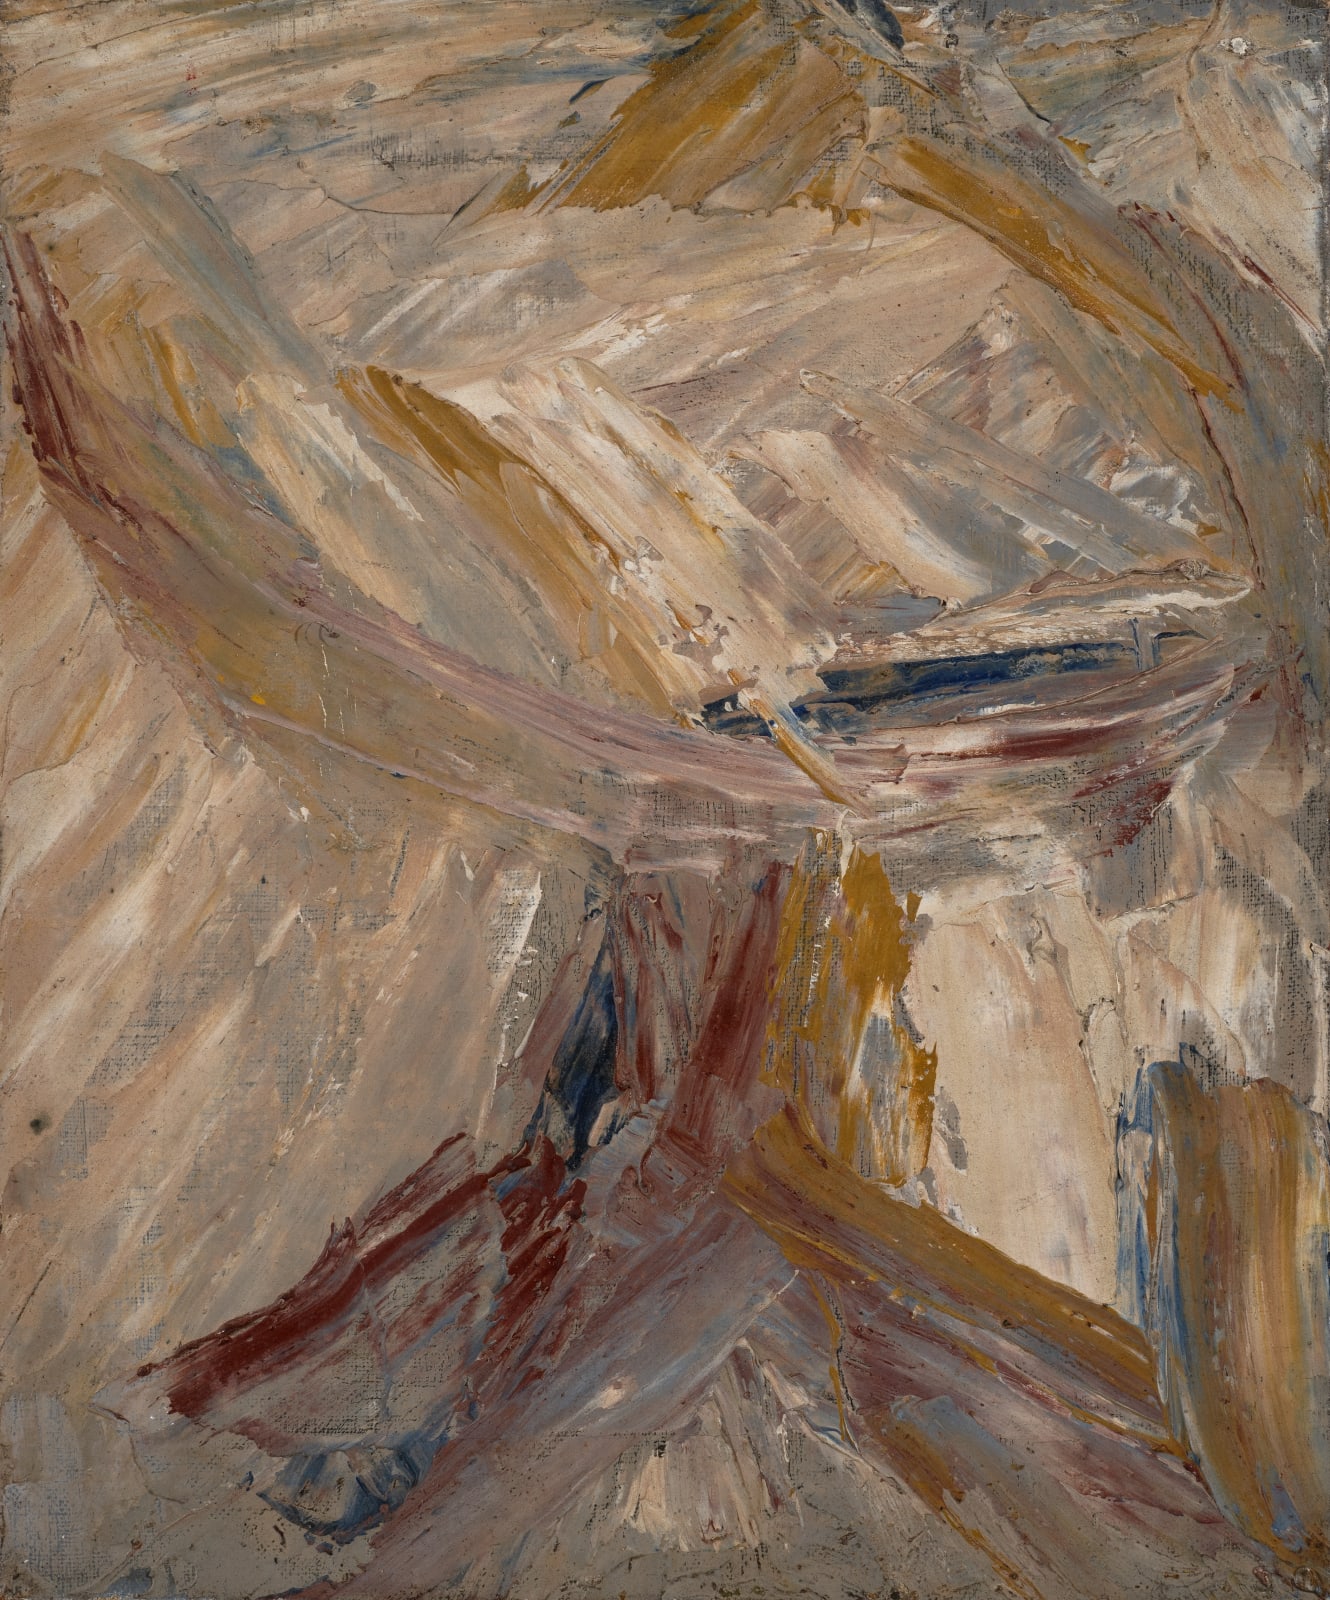 Table, 1956 Oil on canvas 30 x 25cm The Gustav Metzger Foundation